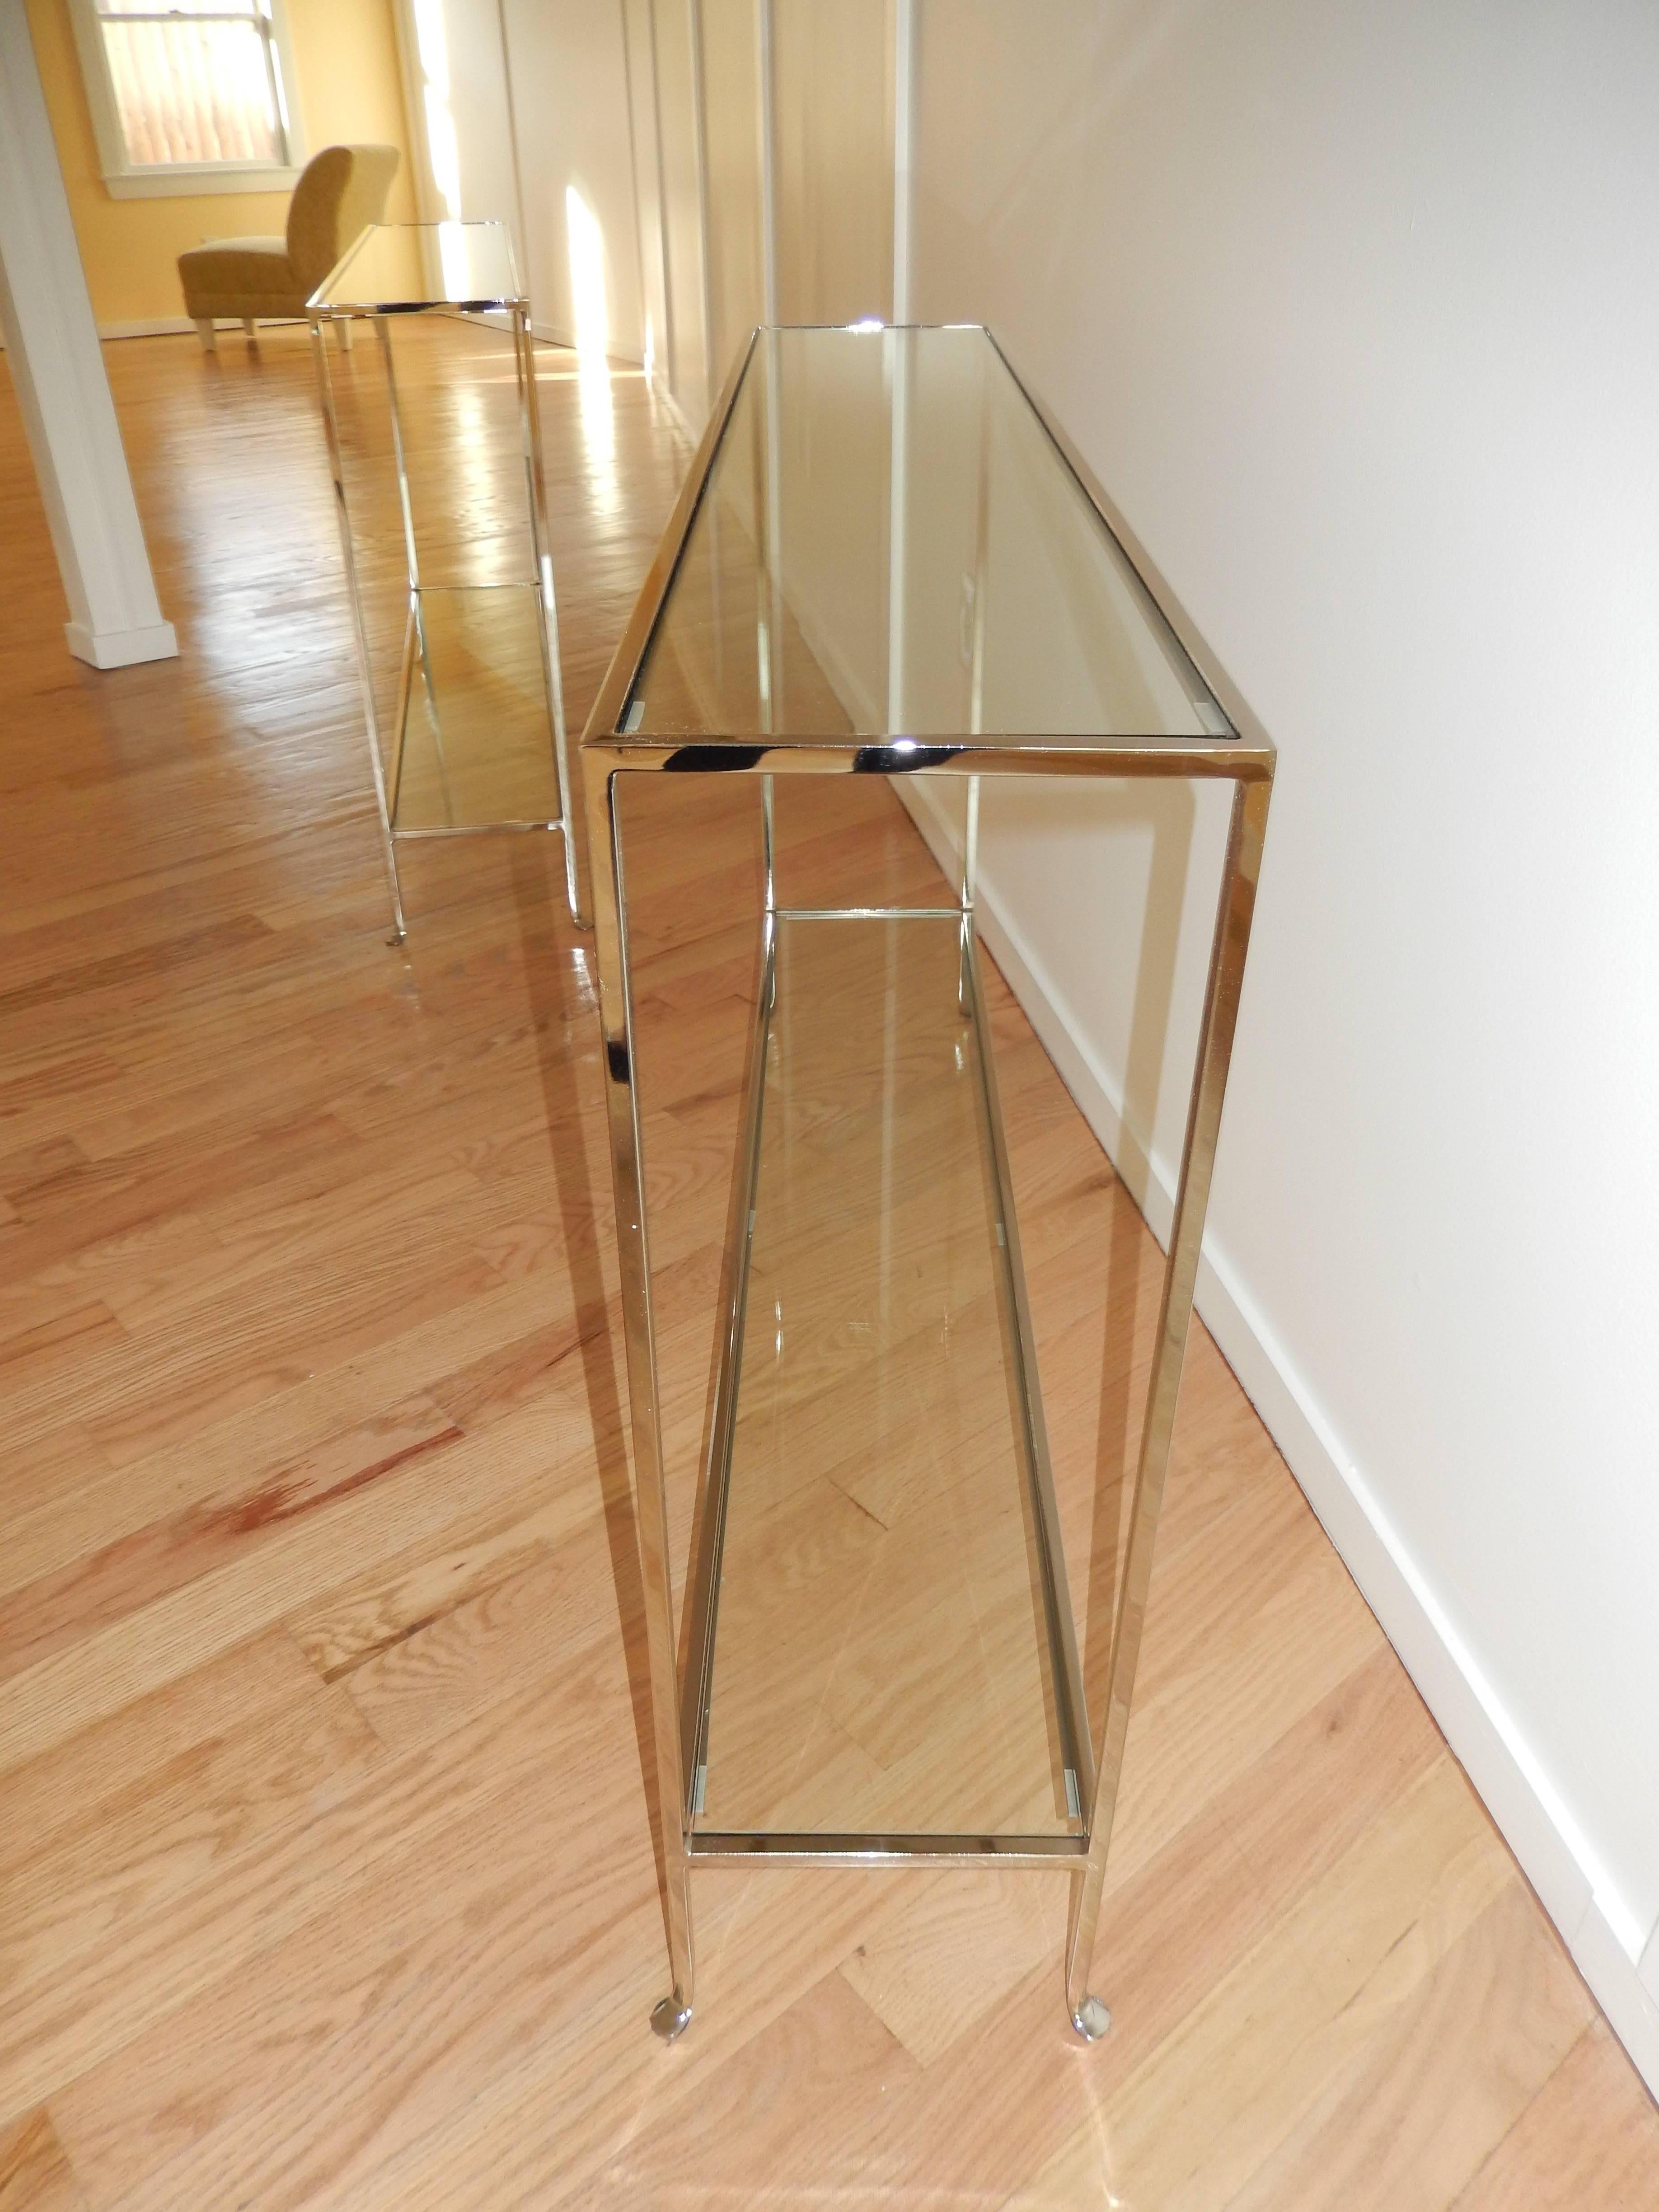 An Italian made nickel and glass slim line console table.This console  fits just about any where with a depth of 10 inches,works well in both traditional and contemporary settings.